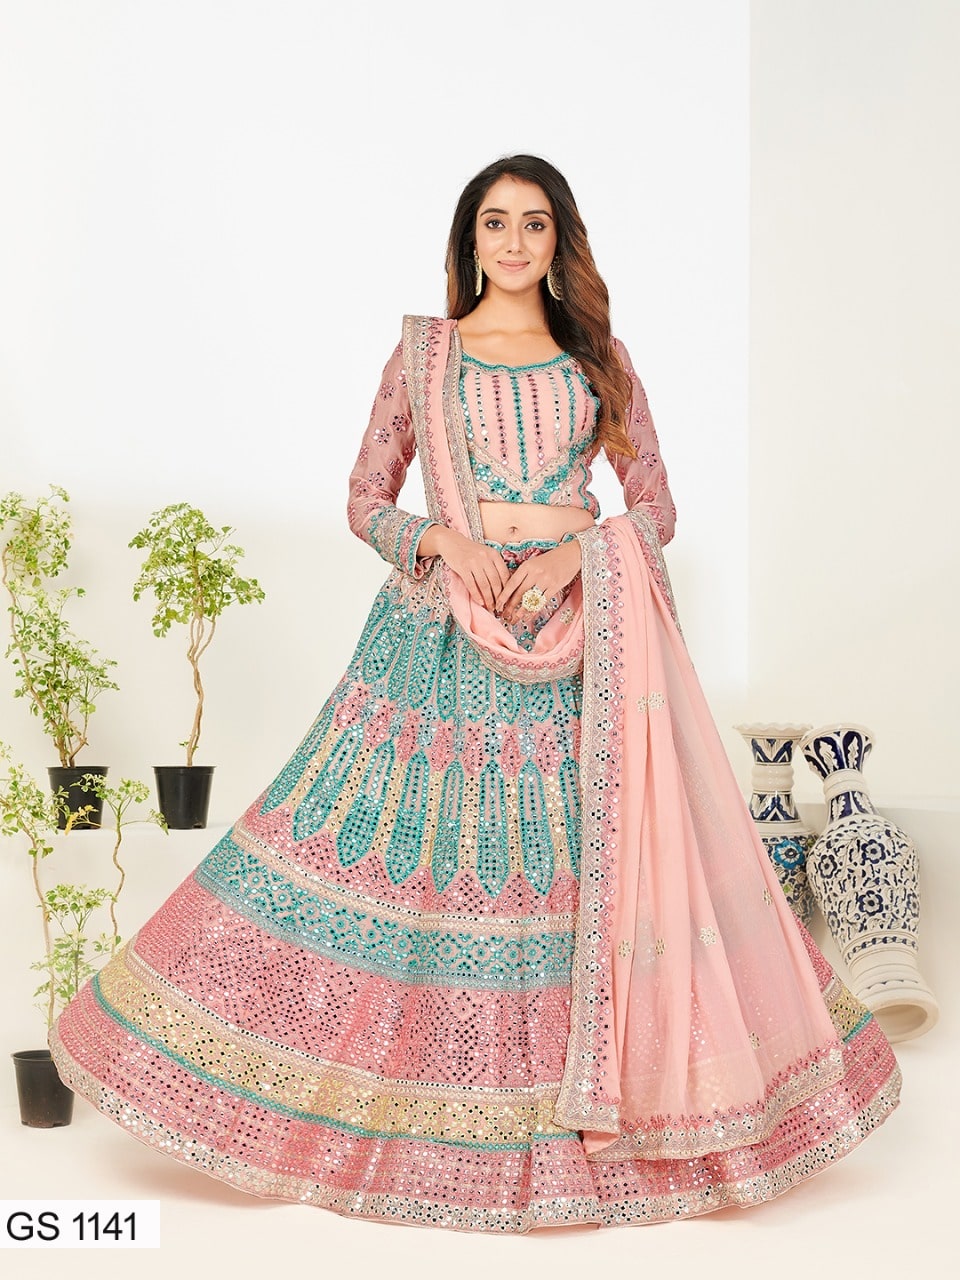 Urva Vol 3 D-1141 Buy Lehenga For Girls Online At Best Prices In India Collection